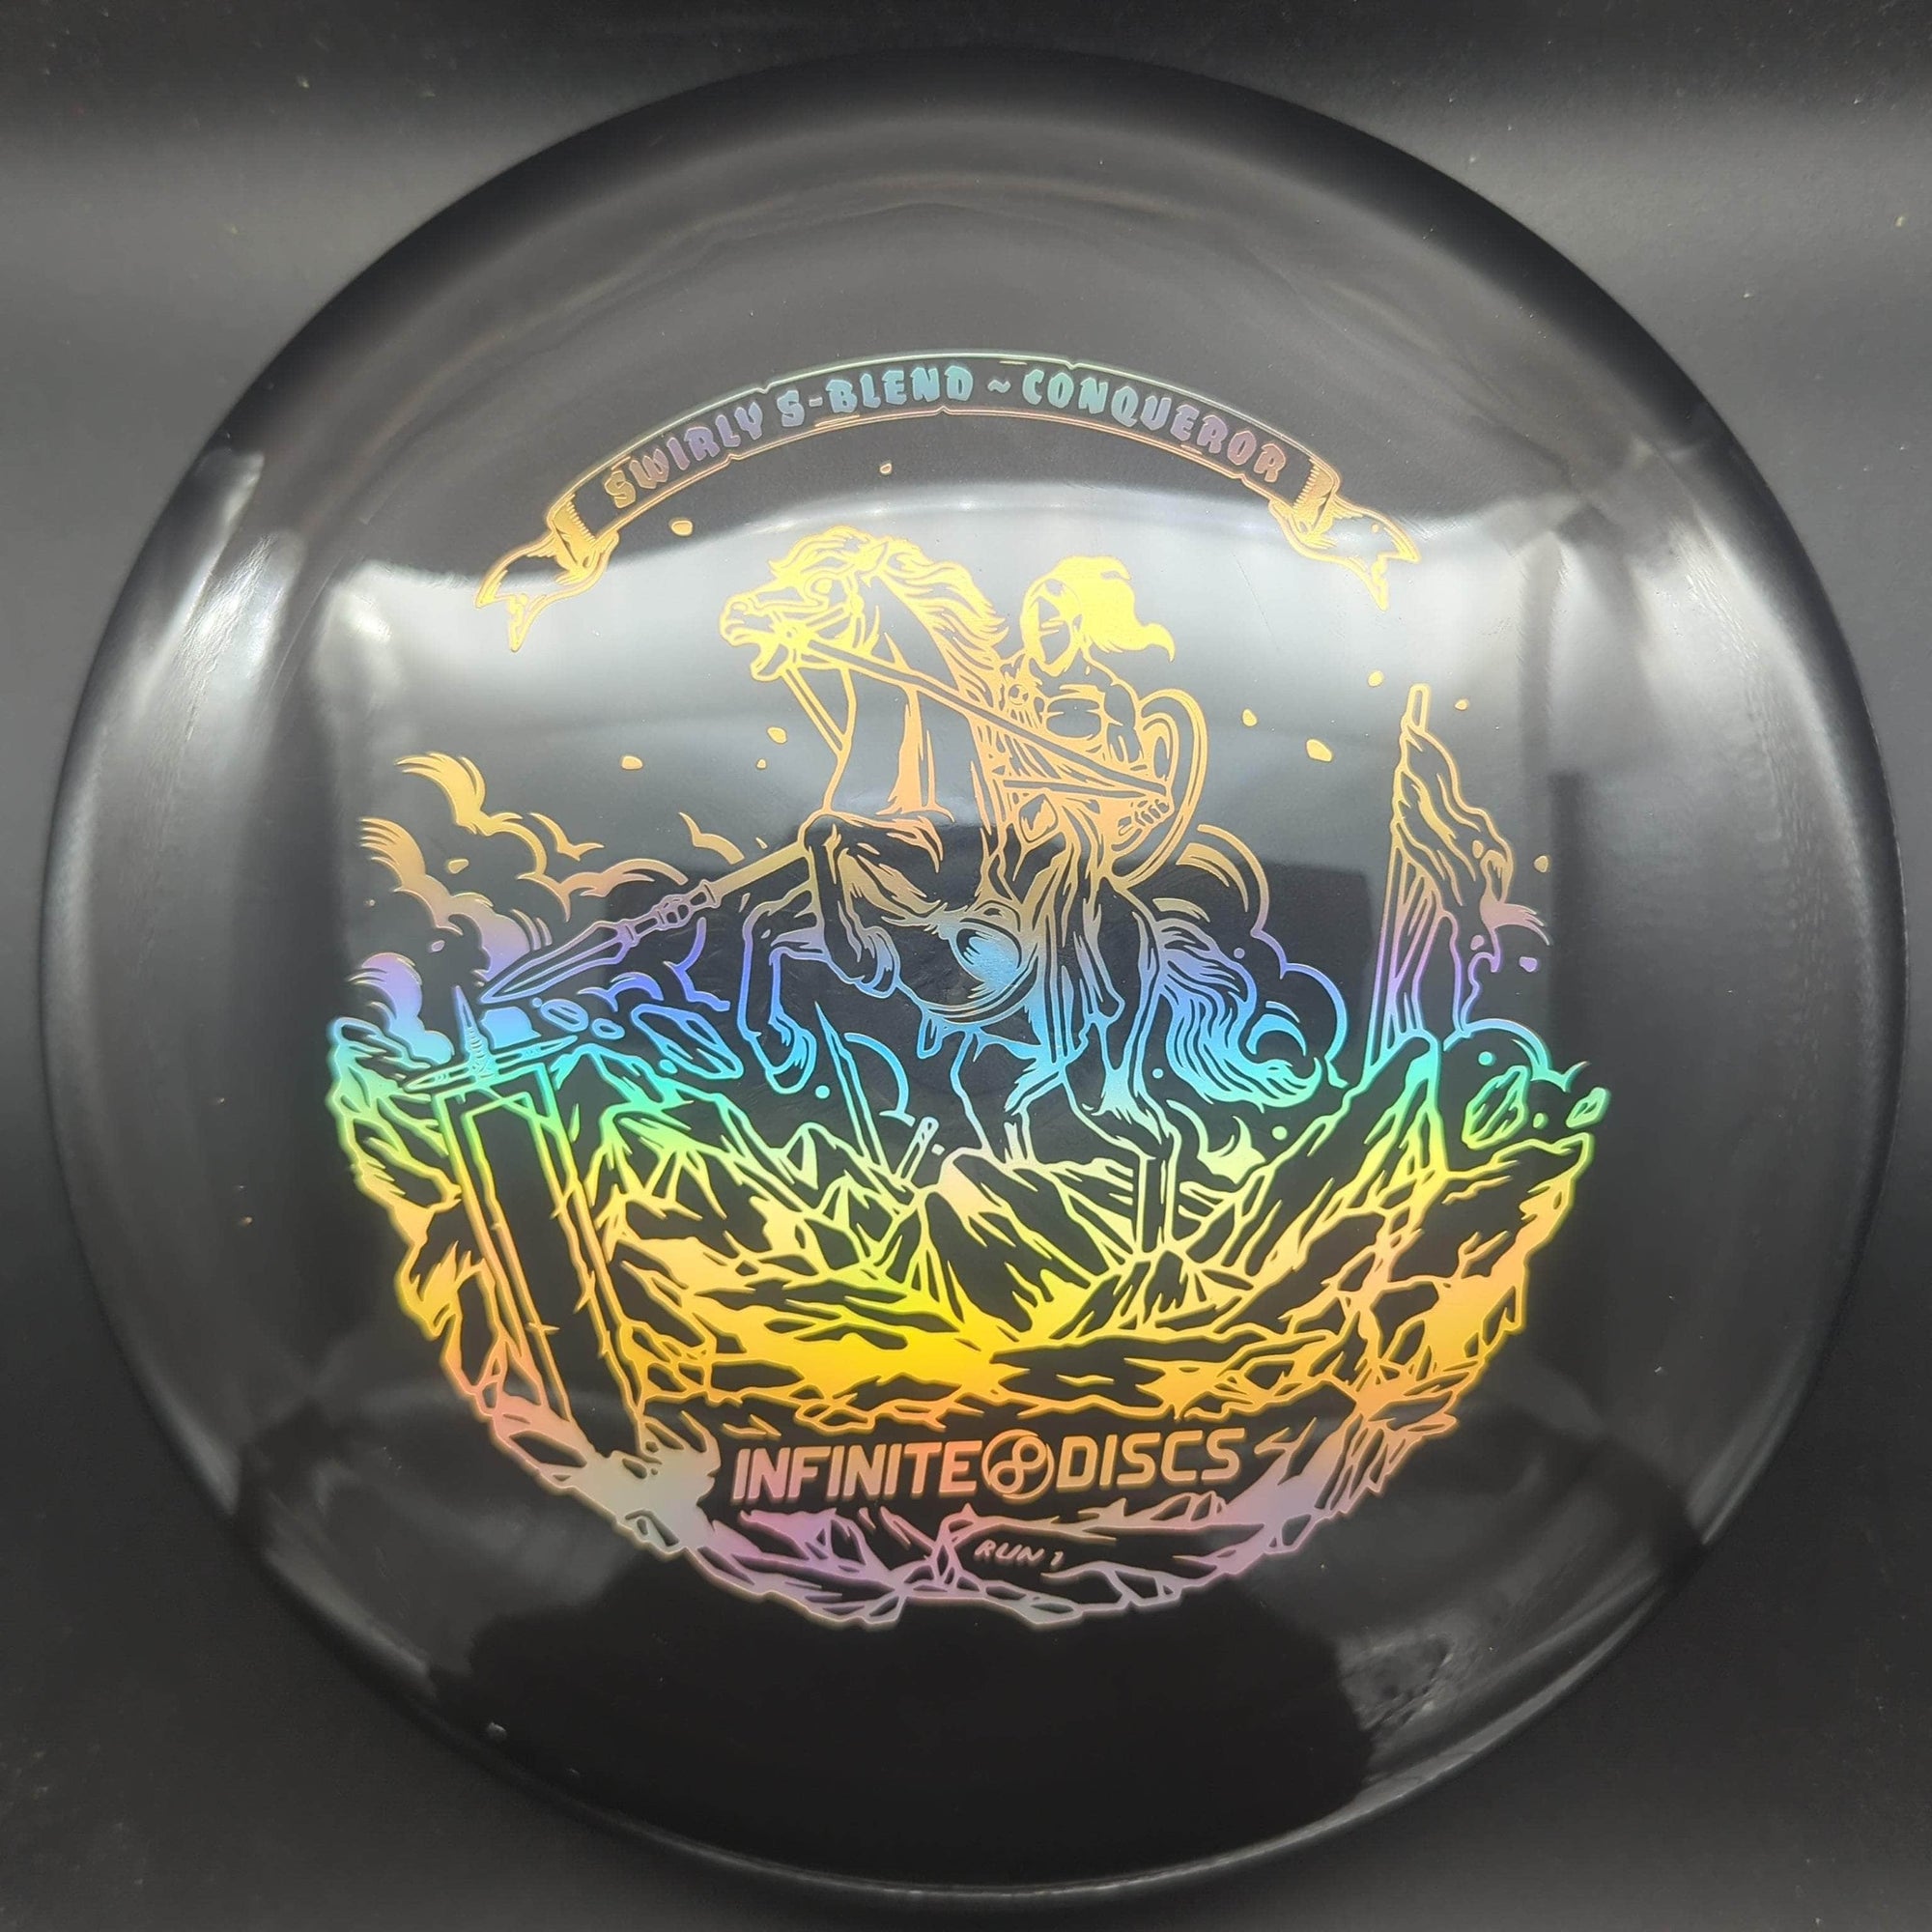 Infinite Discs Distance Driver Black Gold Holo Stamp 172g Conqueror, Swirly S-Blend